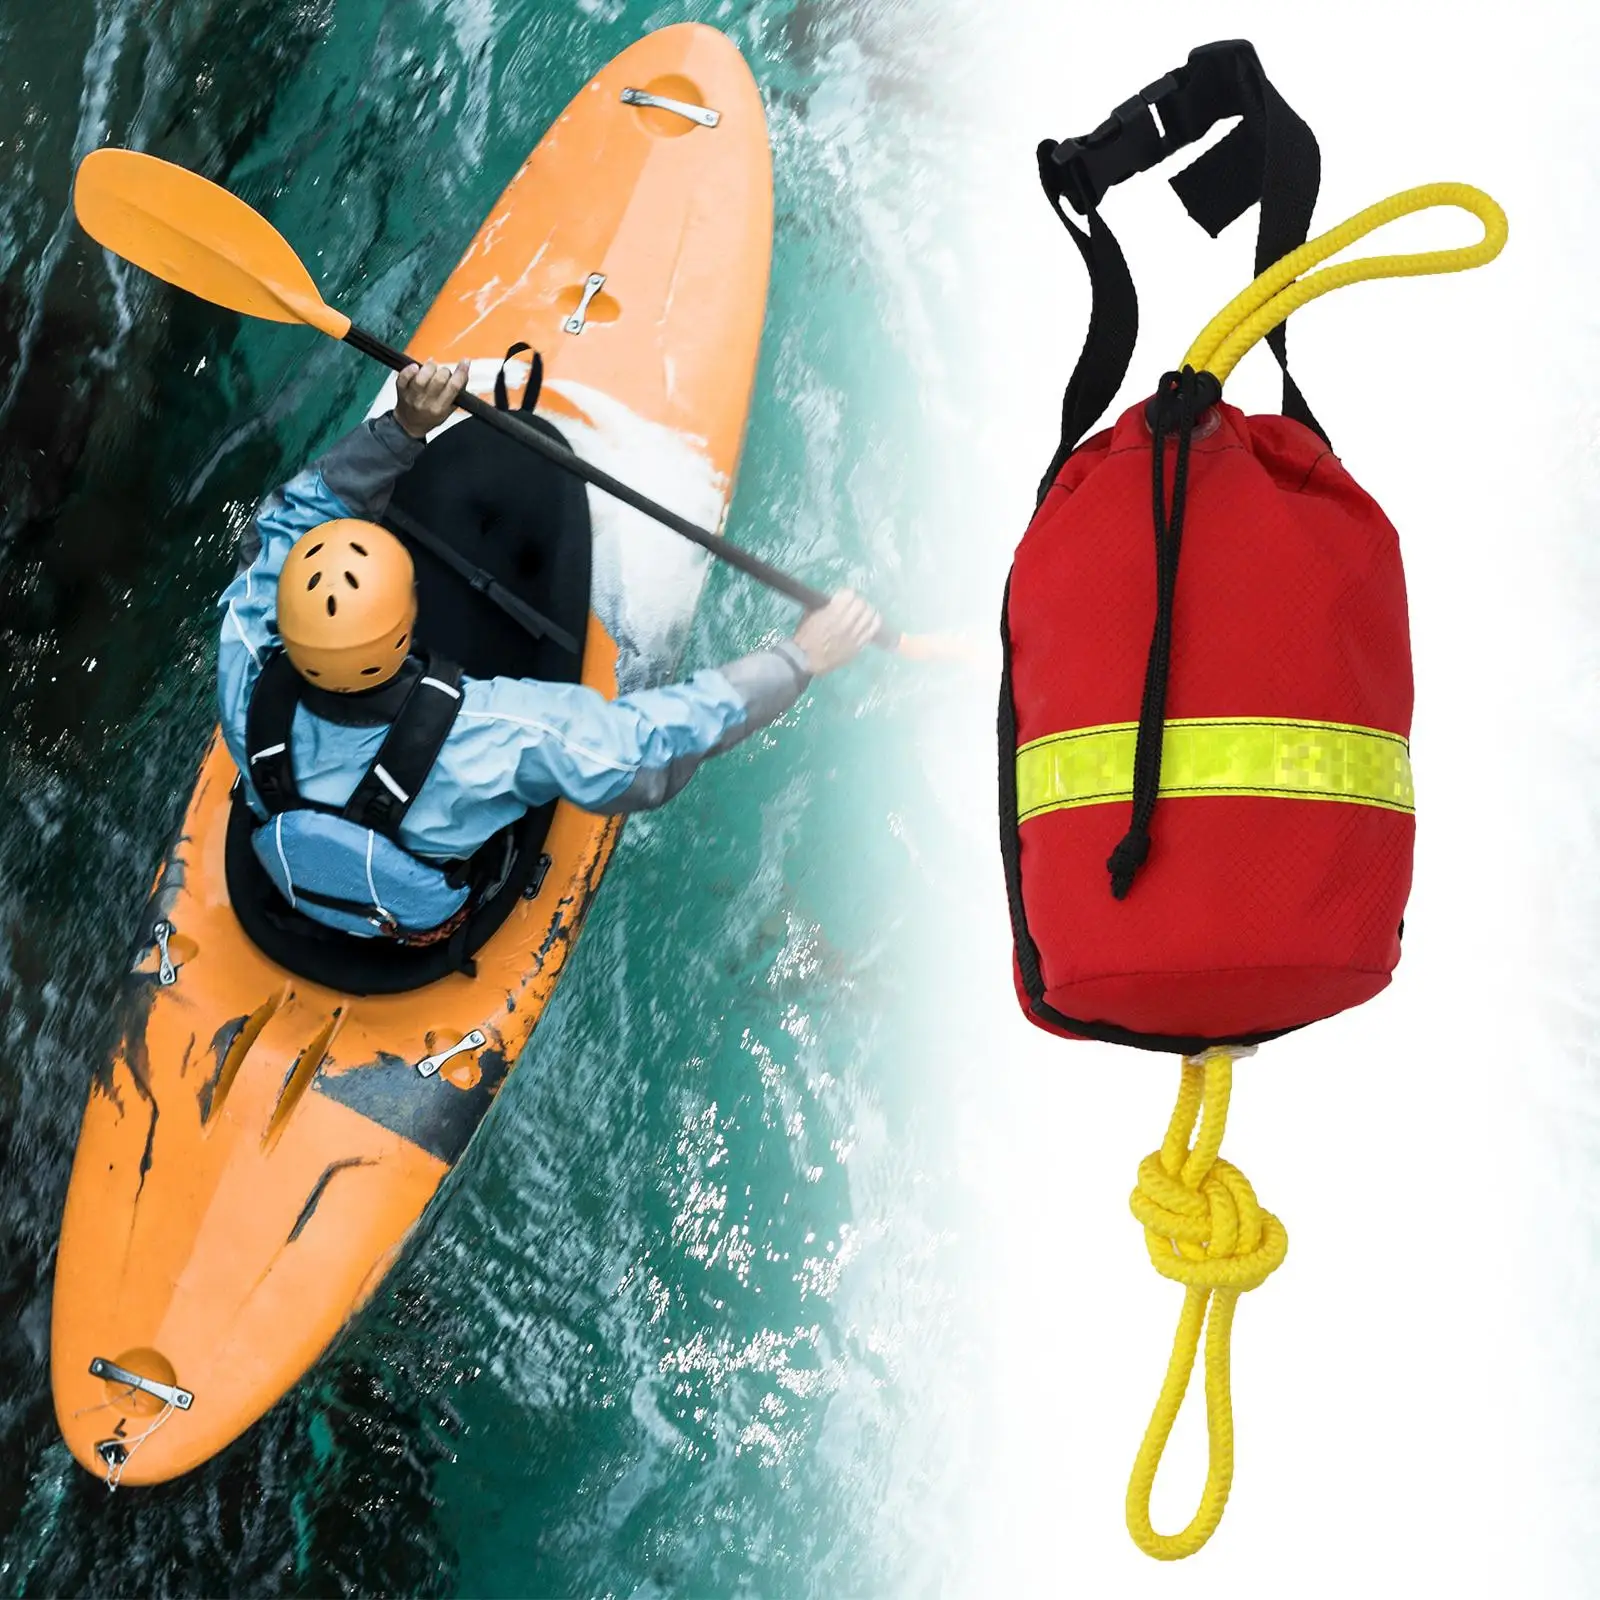 Rope Throw Bag Throwline 21M Floating Throw Bag for Swimming